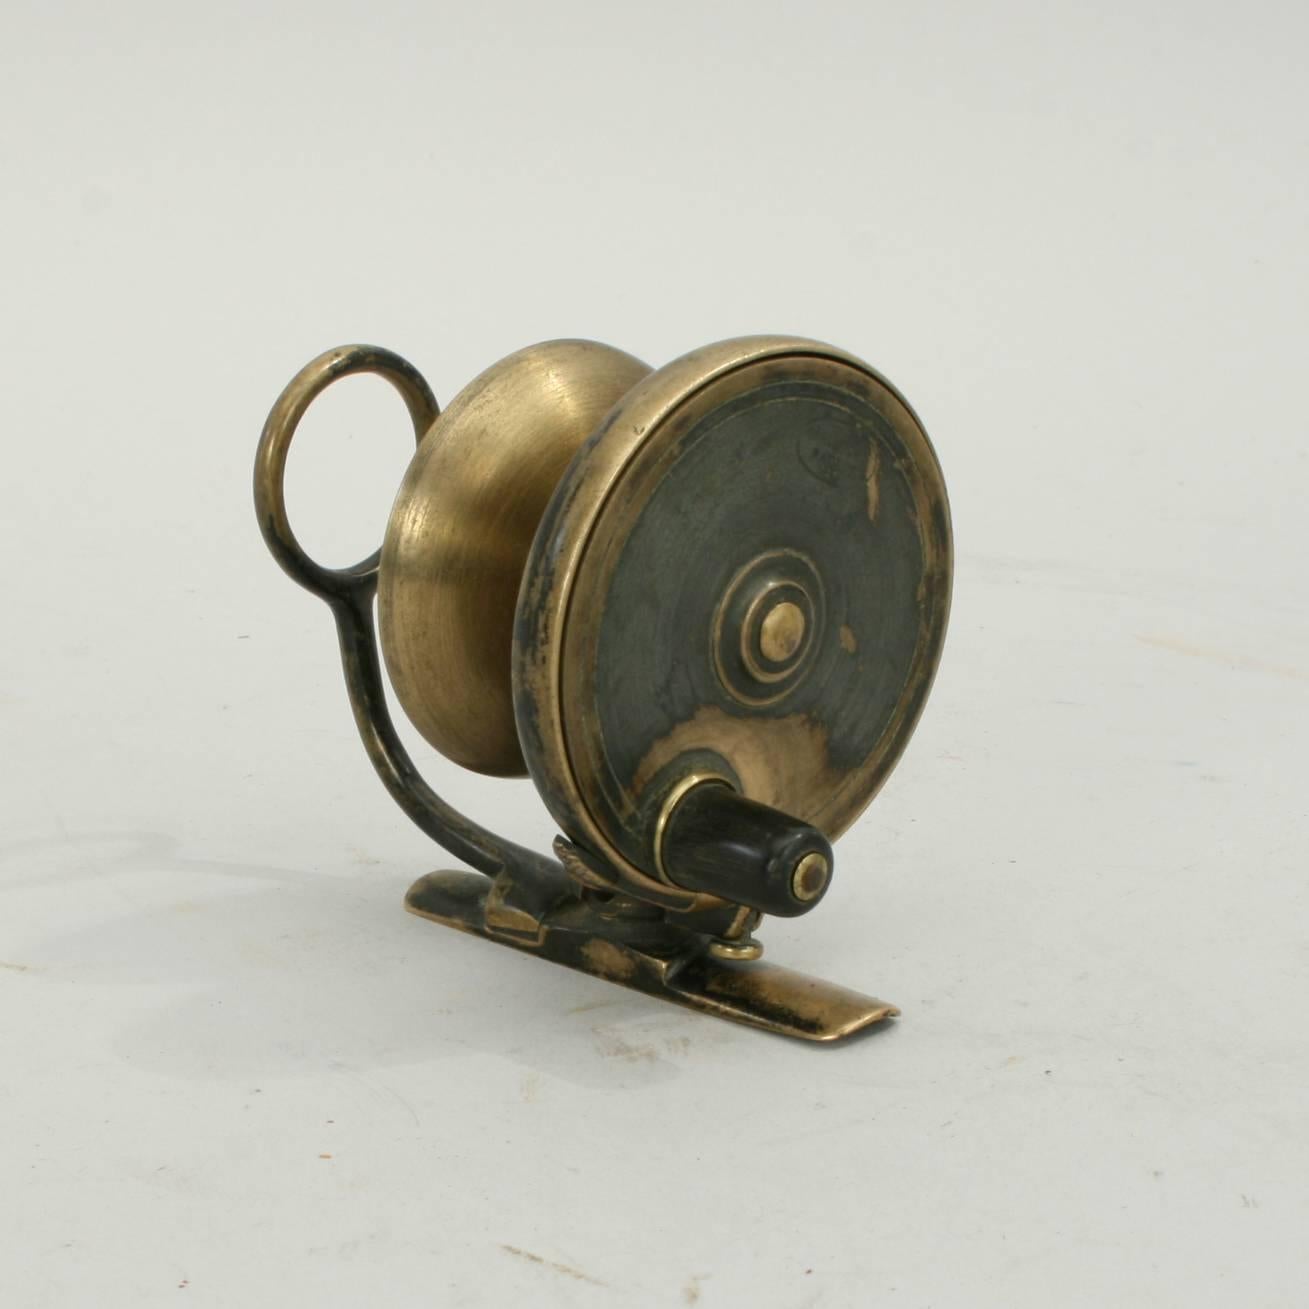 A rare sized (2.5') Malloch of Perth side casting fishing reel of fine quality and in excellent condition. The reel is all brass, with optional check, exchangeable drum and small black Horn handle. The large guide eye remains stationary on the fixed